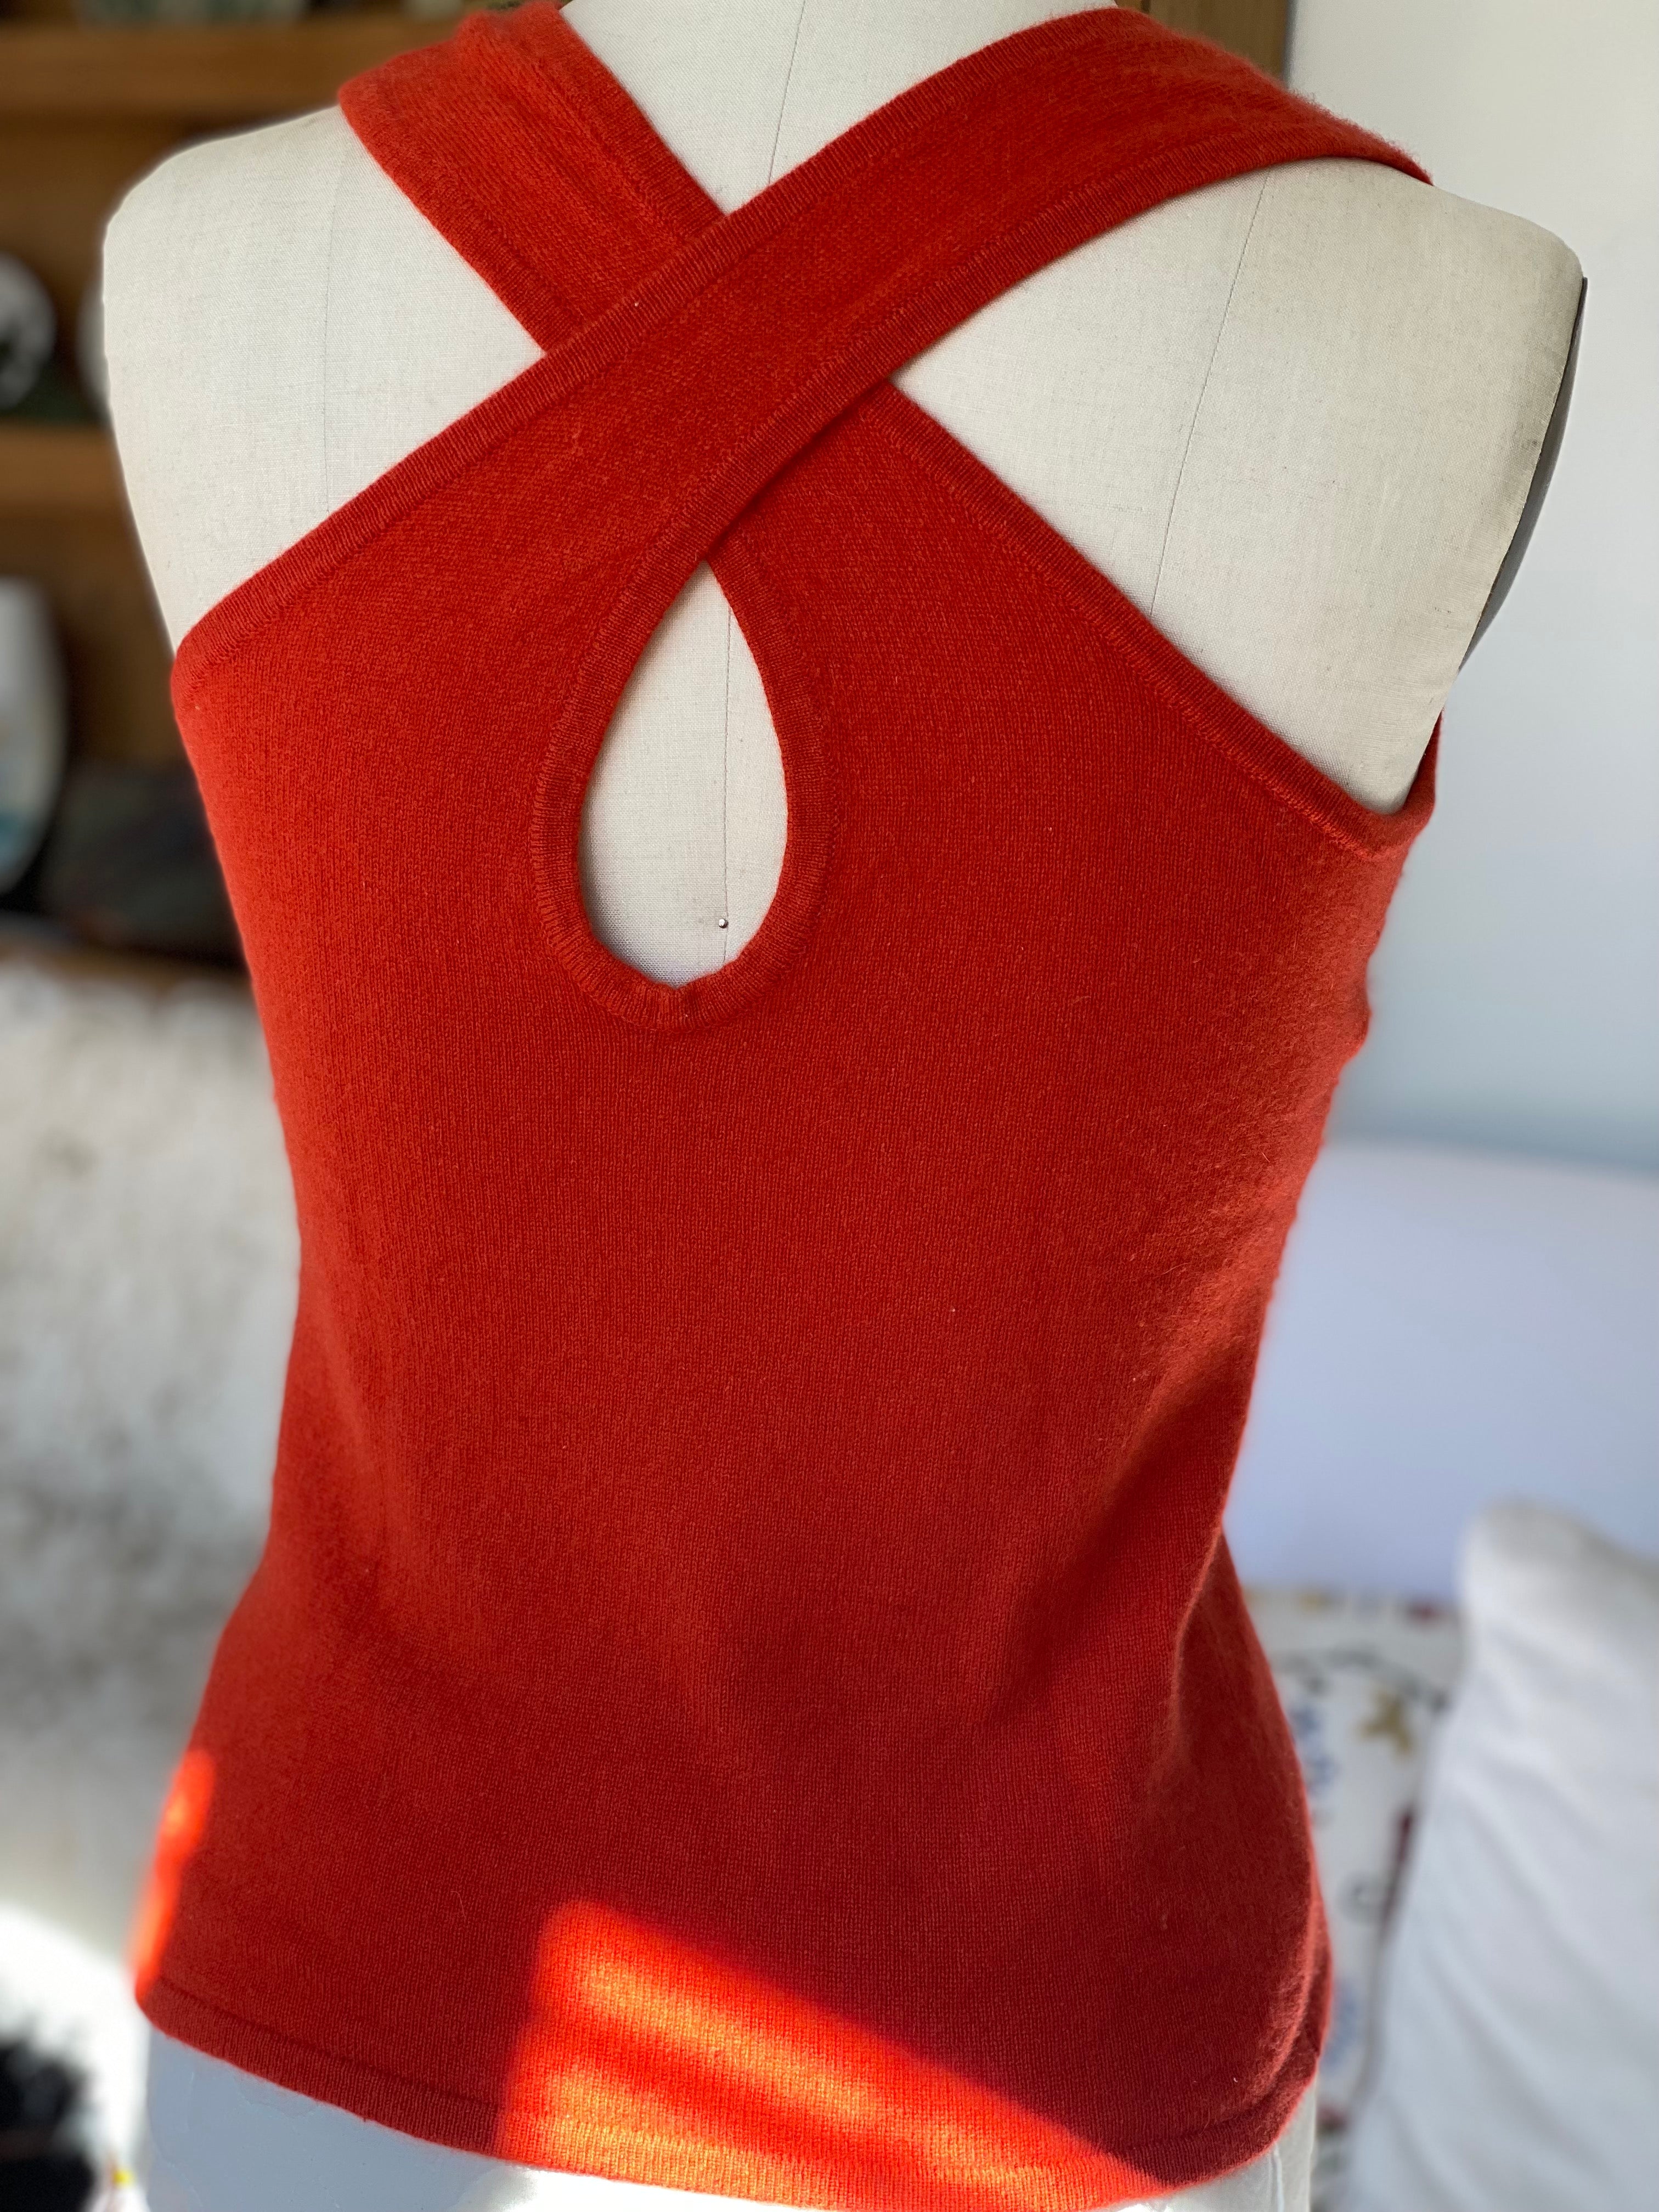 UpCycled Cashmere Cross Back Tank Top.